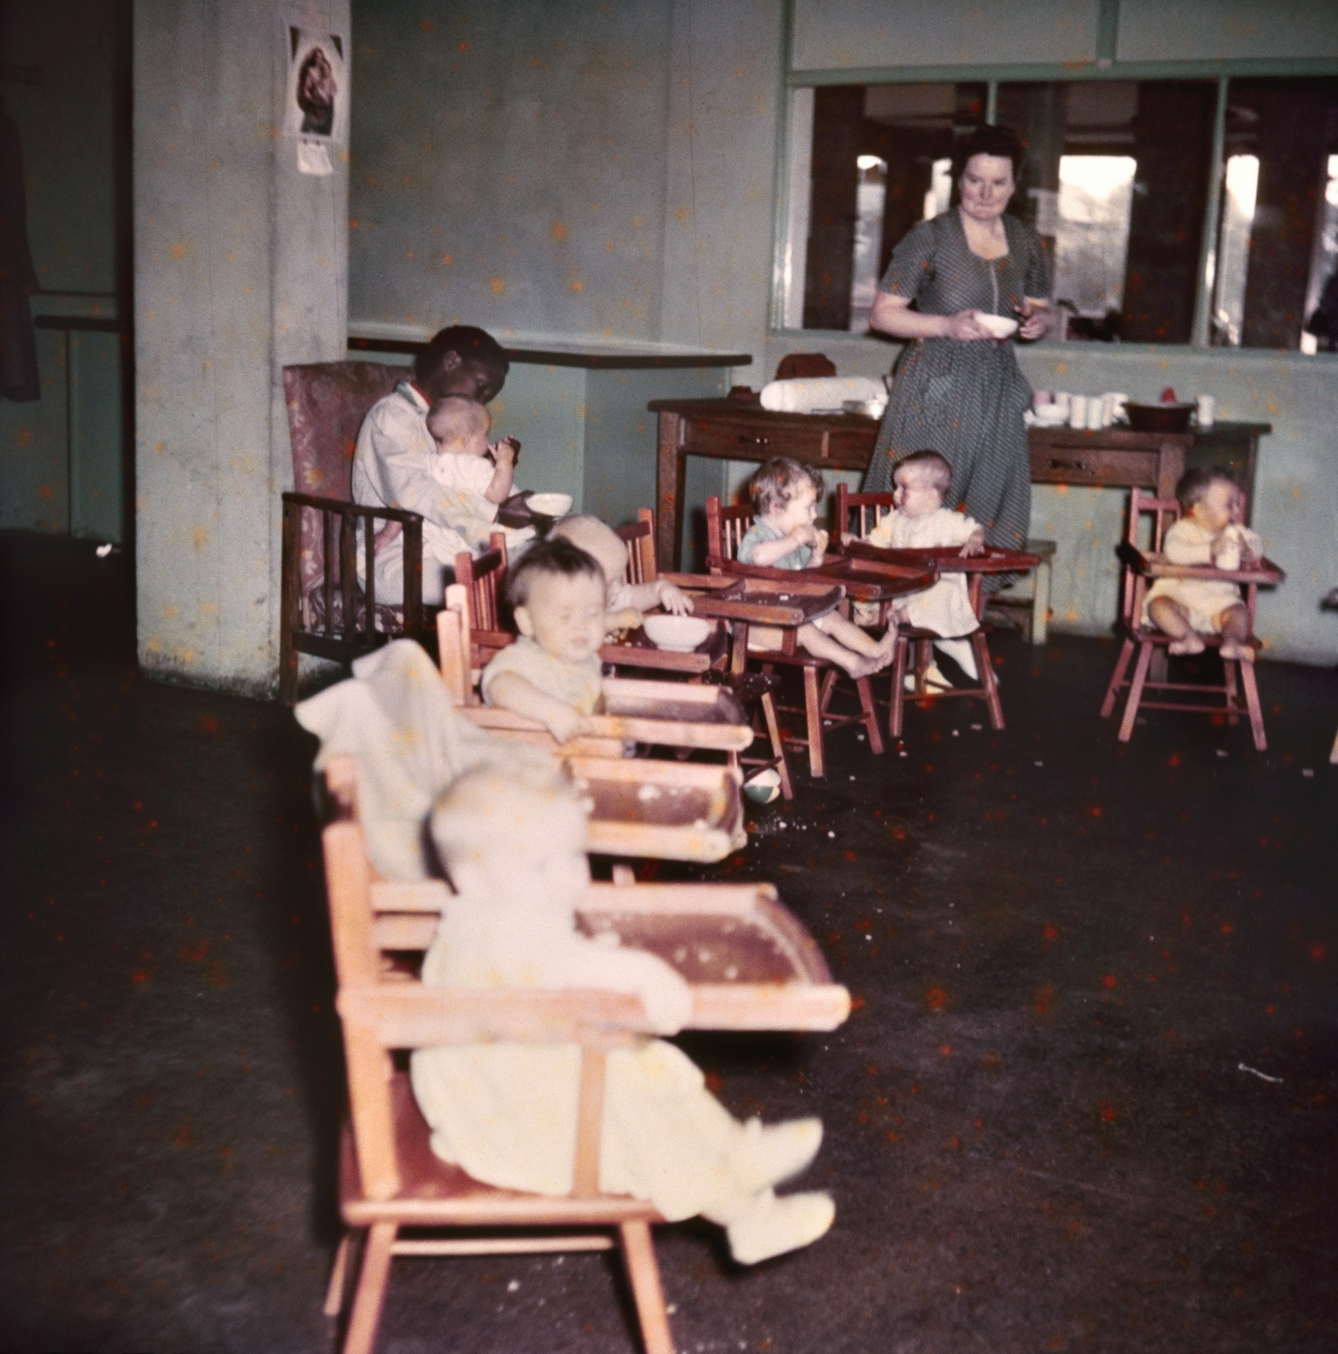 Photograph from the mid-20th Century Peckham Pioneer Centre, showing a long row of eight high-chairs, six of which are occupied by infants who are eating or drinking. Behind them, a woman sits in a chair with a child on her lap and a bowl in her hand, and another woman approaches from behind holding another bowl.